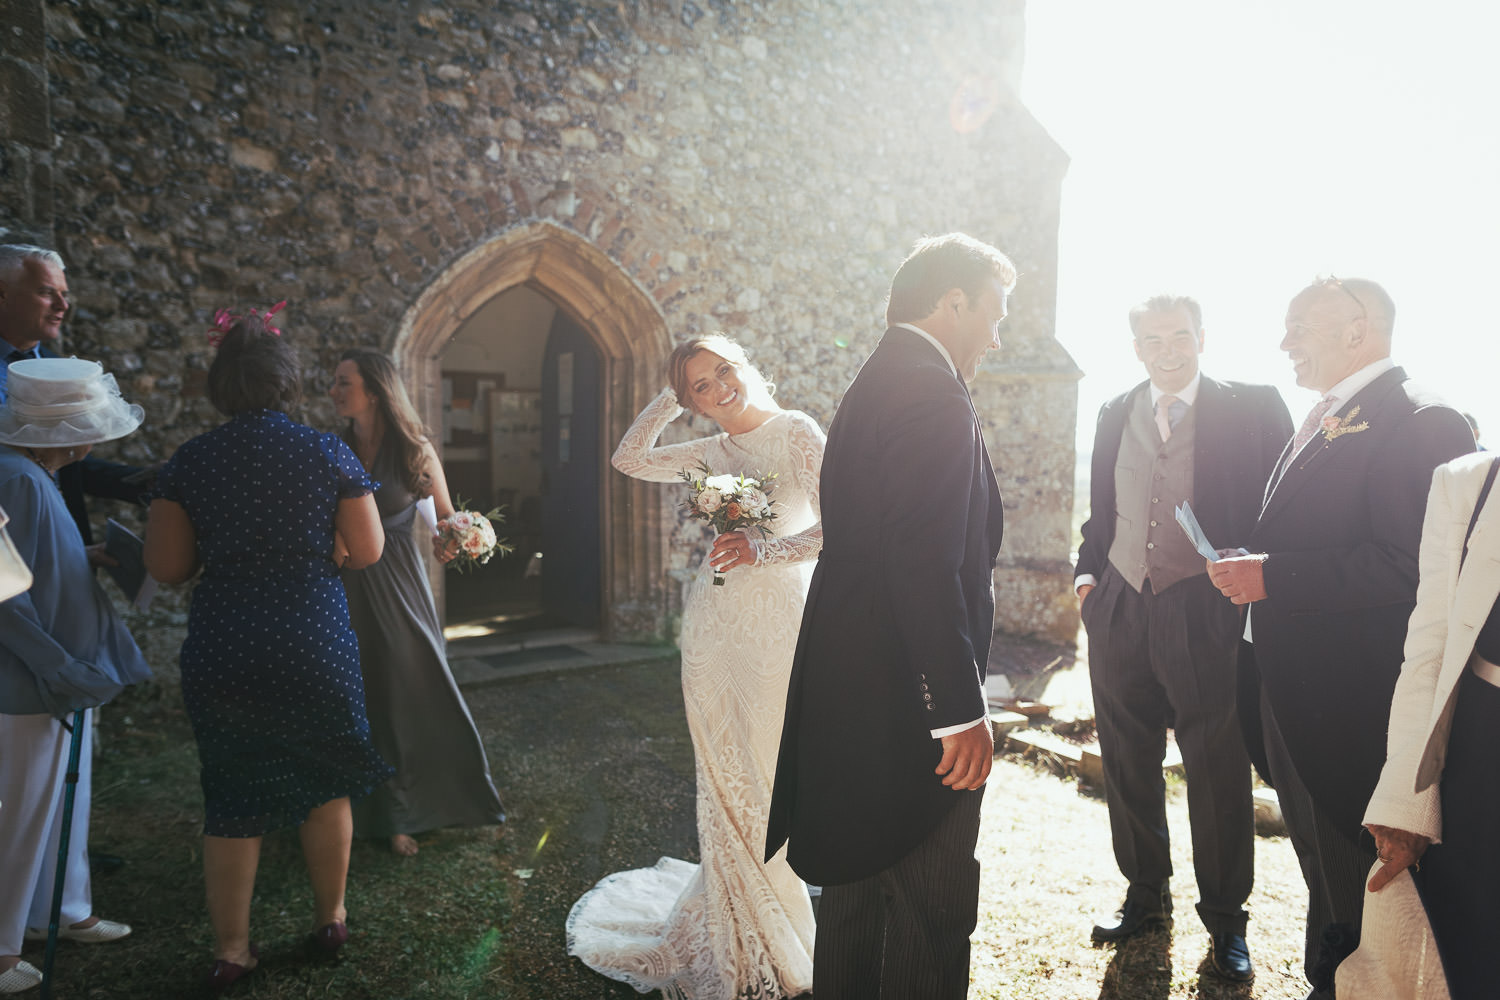 Wedding at The Church of St Mary & St Margaret in Stow Maries, near South Woodham Ferrers. Guests chat while bride, illuminated by sunlight, looks at camera. She wears a bespoke long lace wedding dress with sleeves by Louise Sullivan (Louise Bridal) dressmaker.